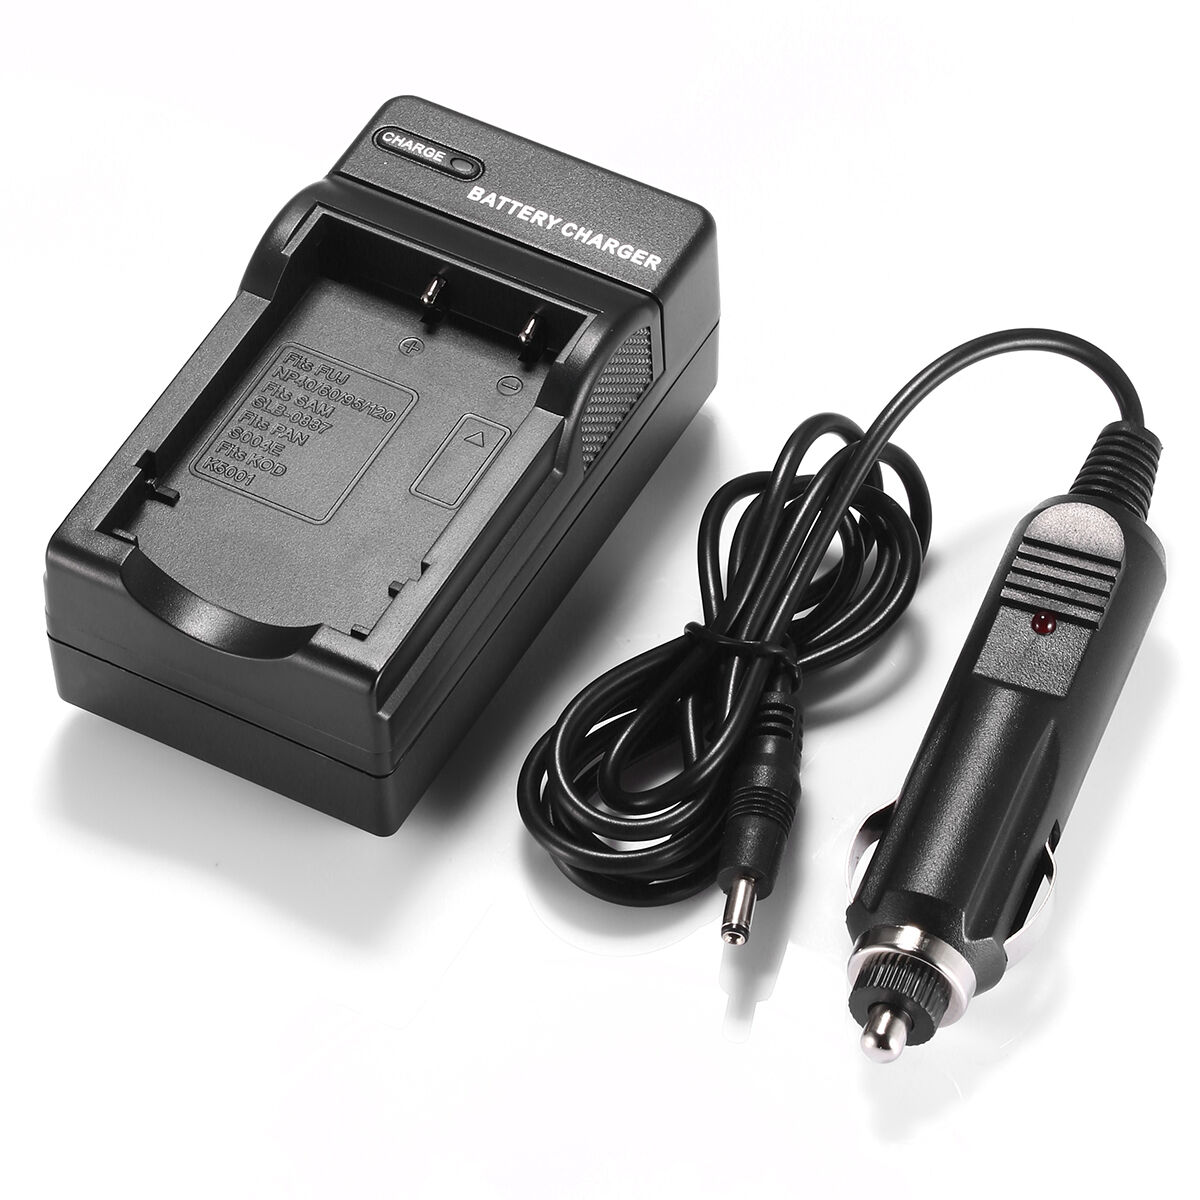 CASIO Exilim Zoom EX-Z250RD battery charger